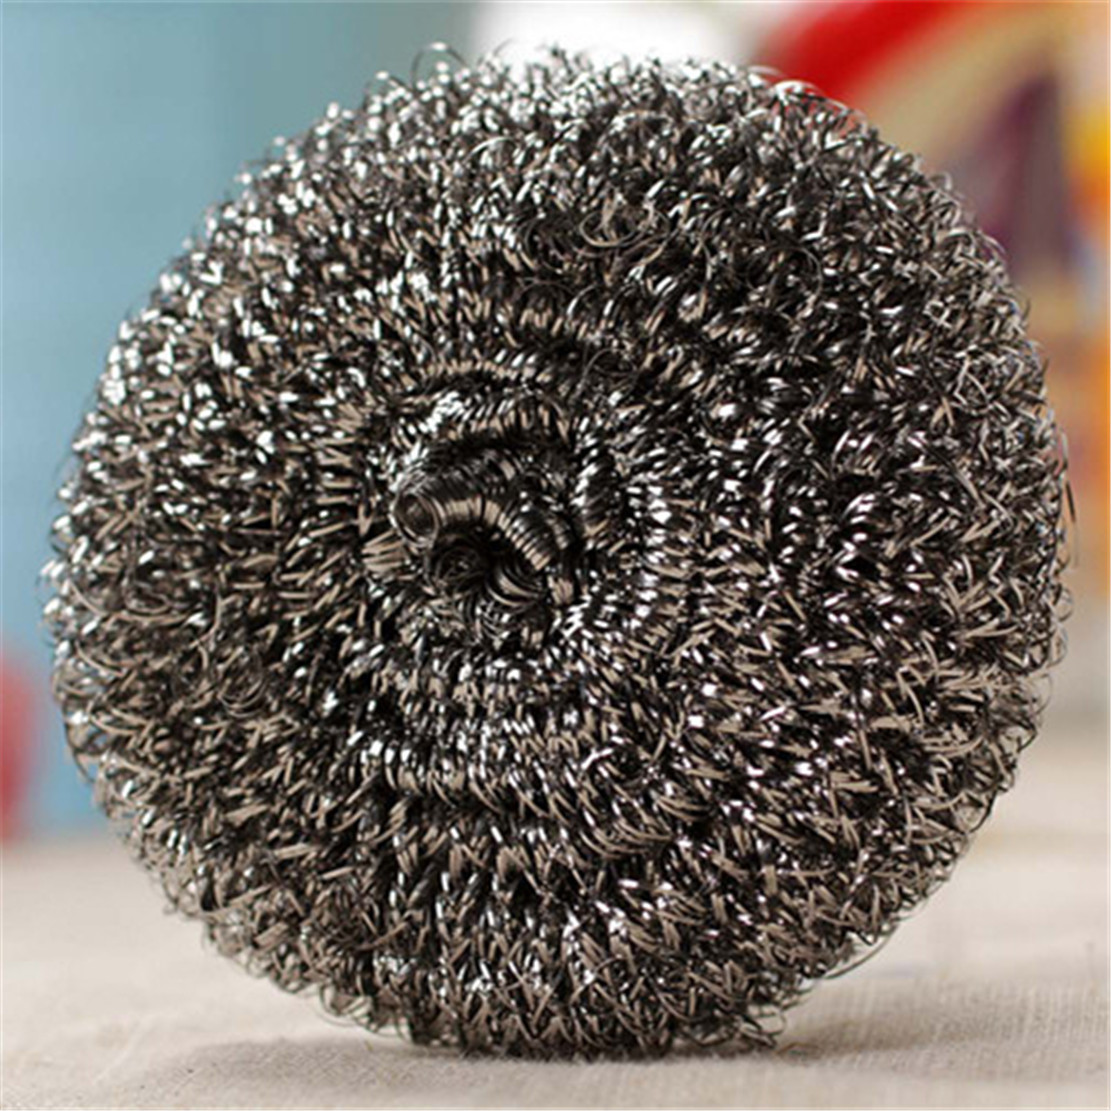 Wholesale Premium Stainless Steel Scrubber, Metal Scouring Pads, Steel Wool Pads, Kitchen Cleaner, Heavy Duty Cleaning Supplies from china suppliers